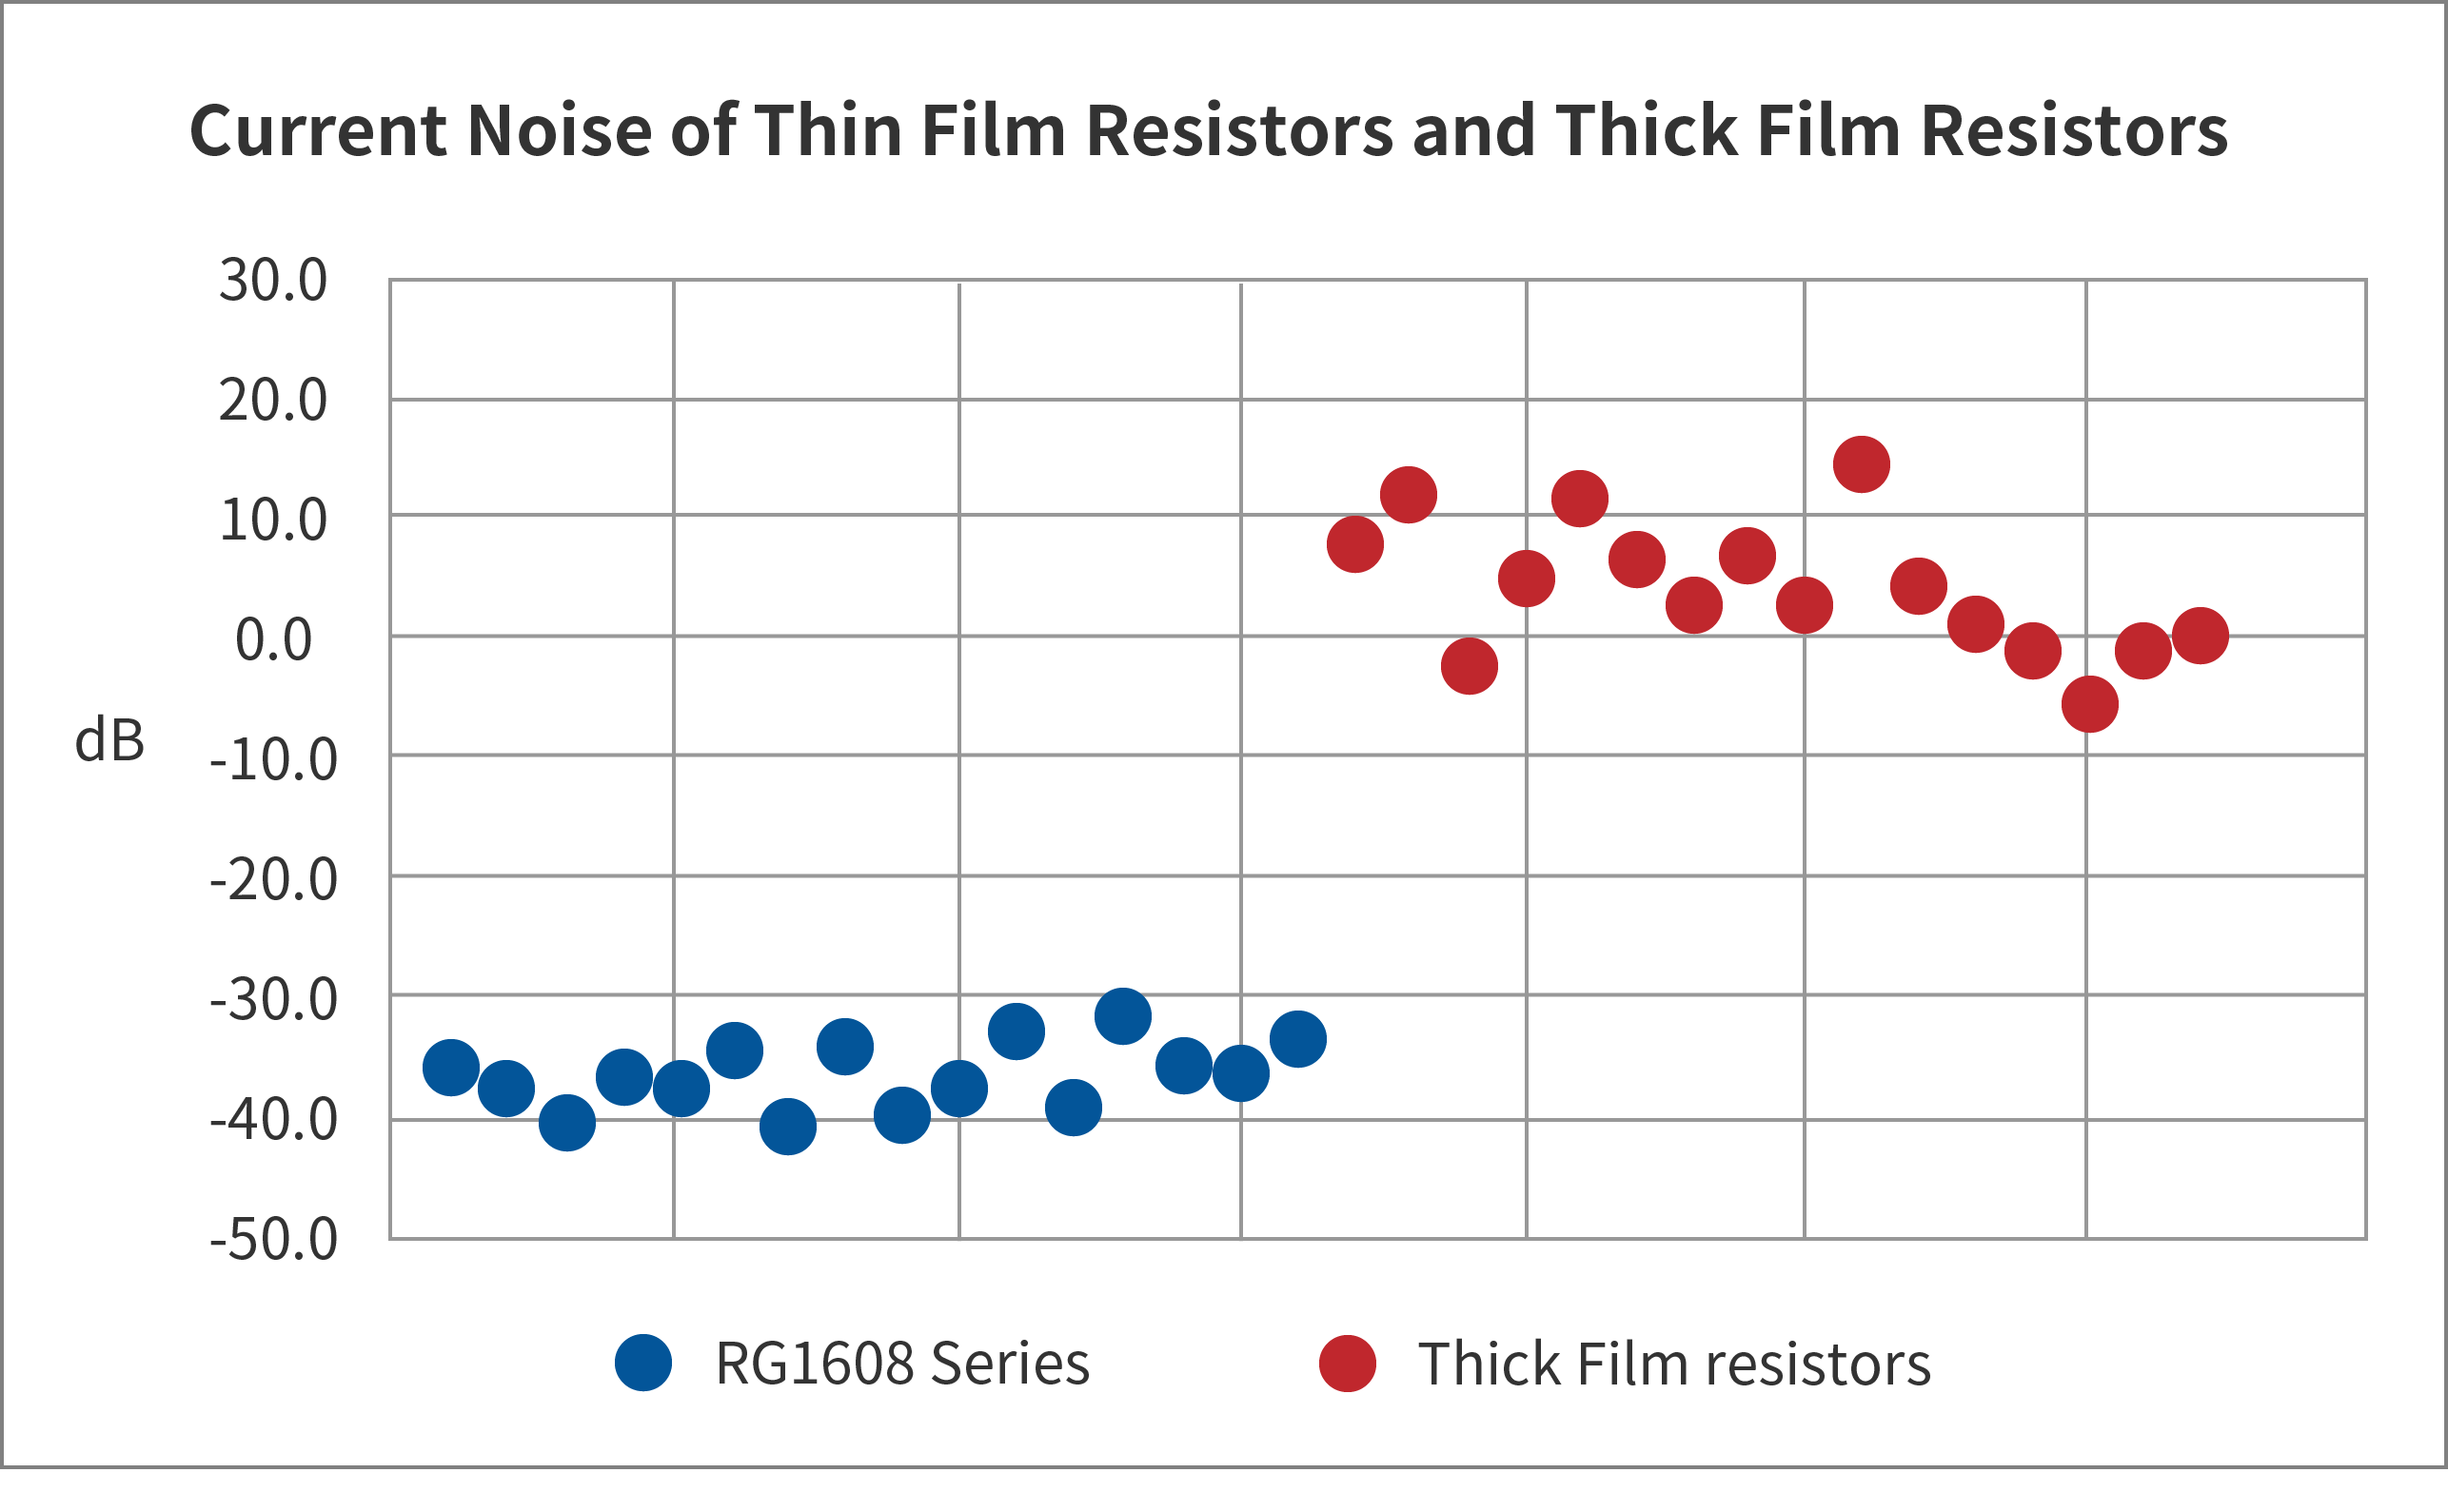 Current Noise of Thin Film Resistors and Thick Film Resistors